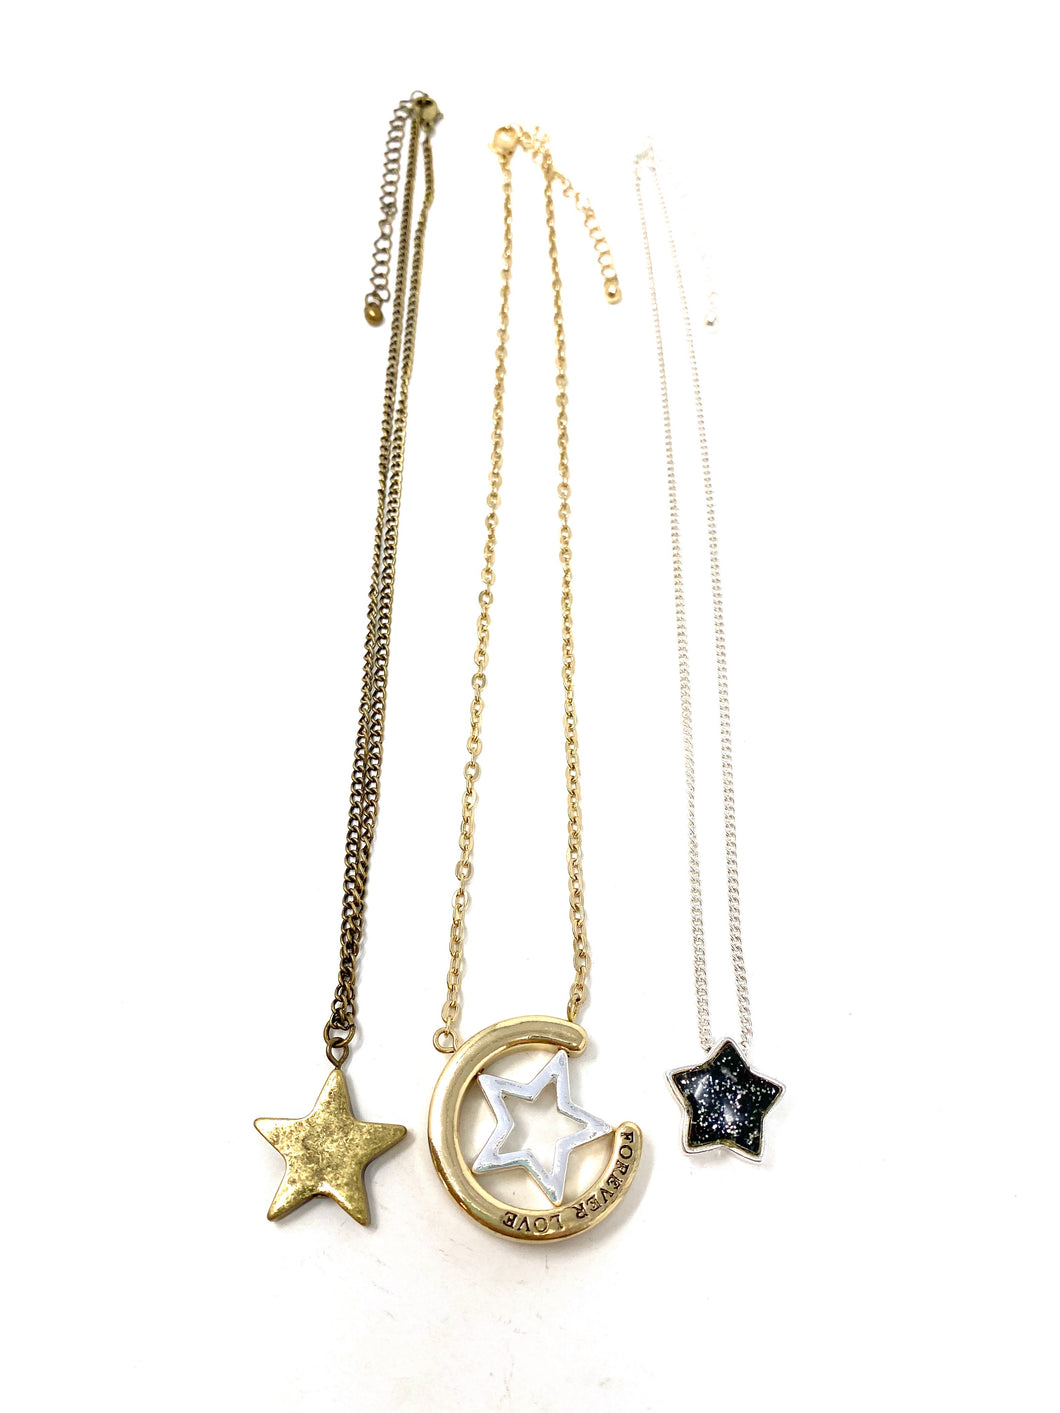 Forever Love Star Charm Necklace Set